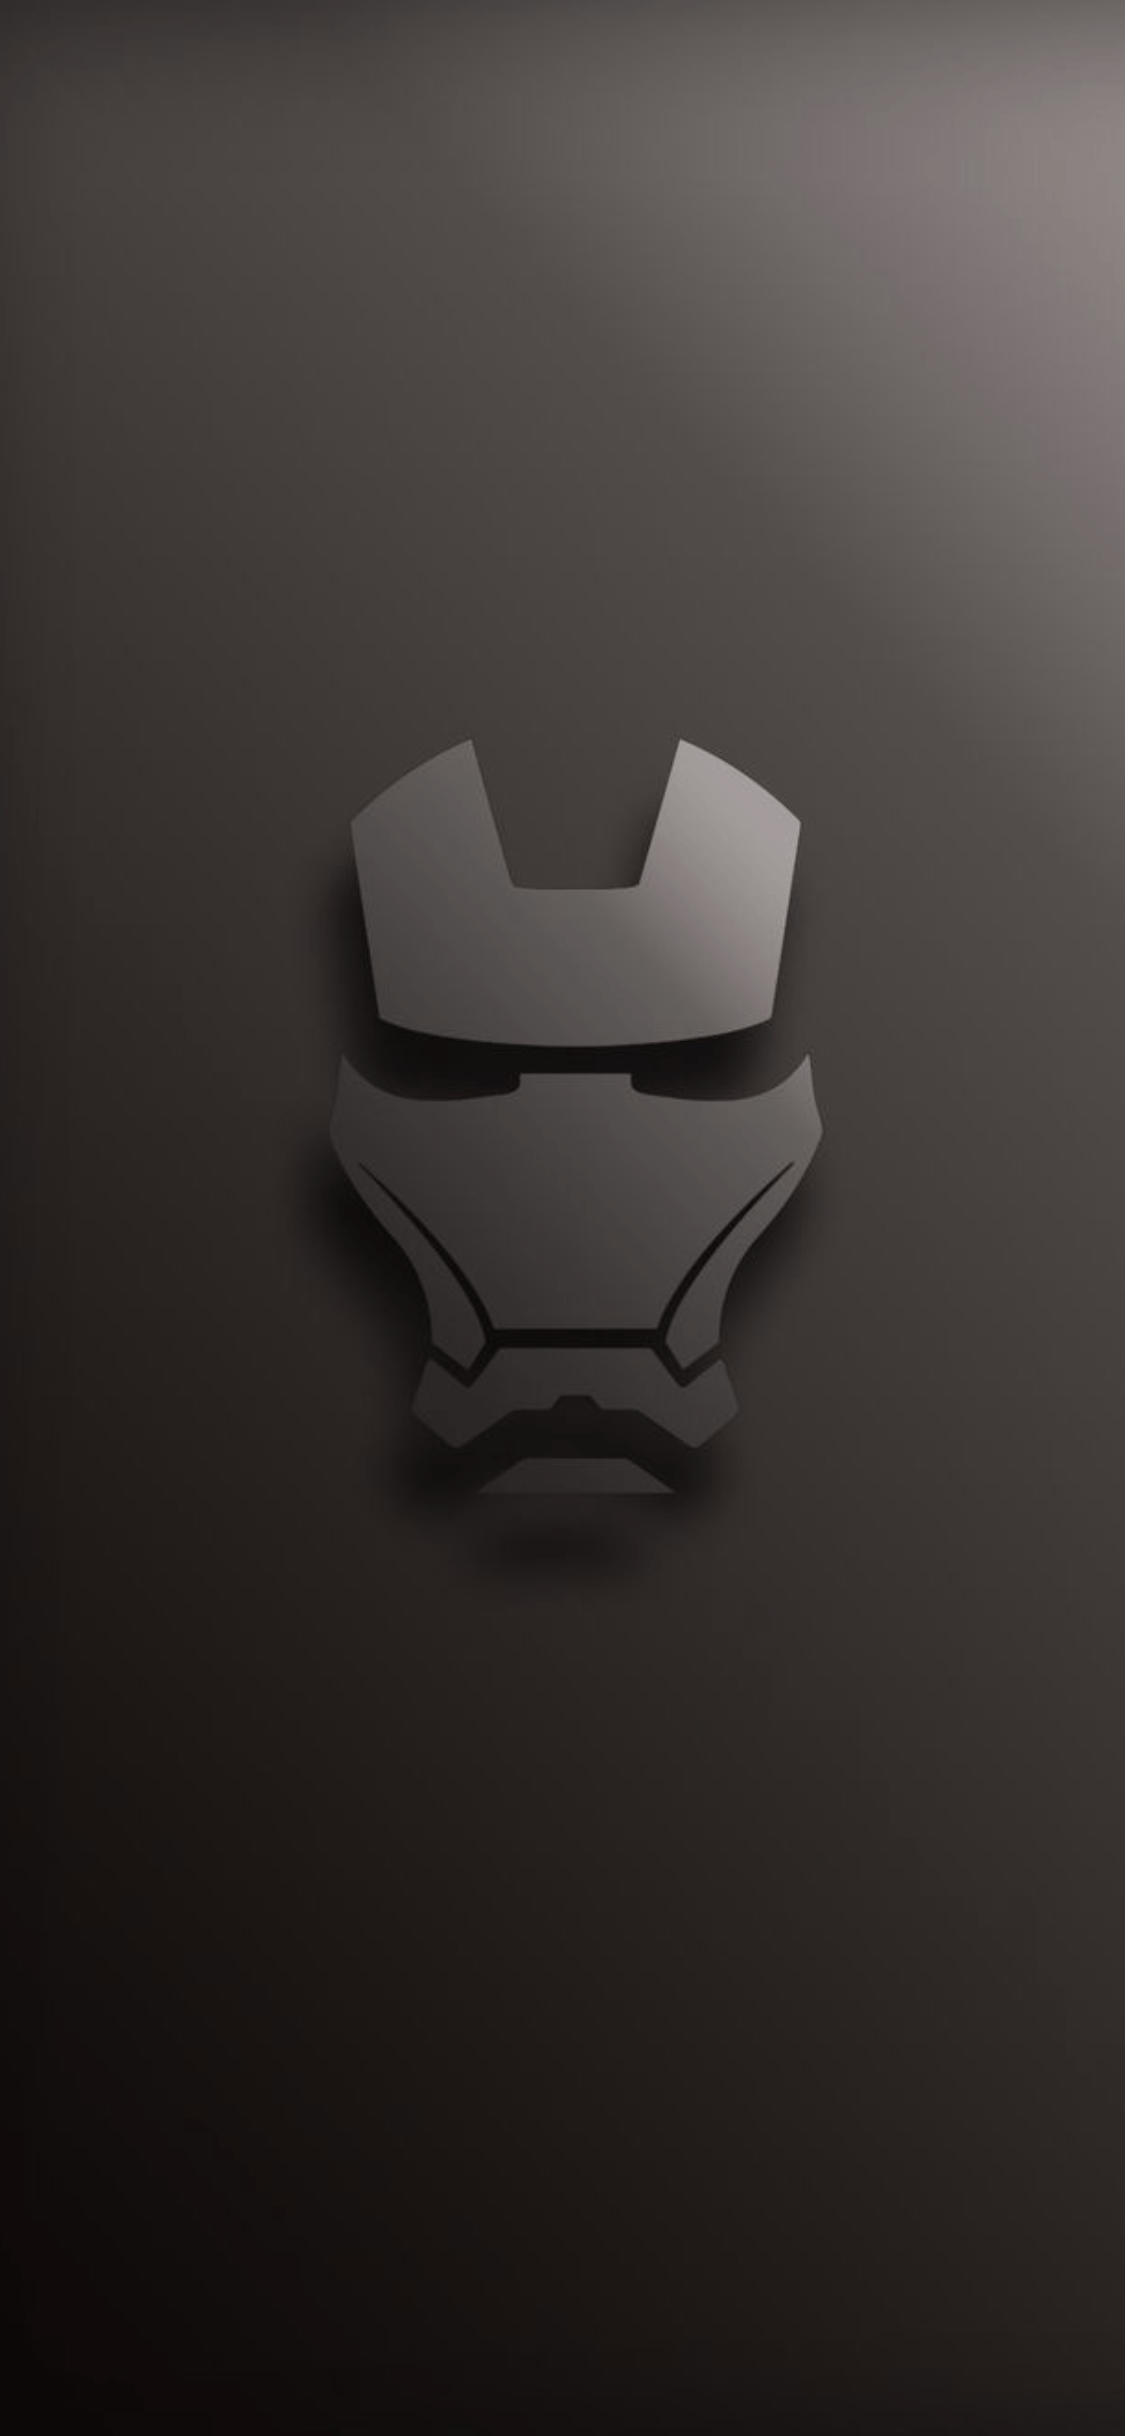 Download Cool Marvel Wallpaper for Android Phone This Month. Iron